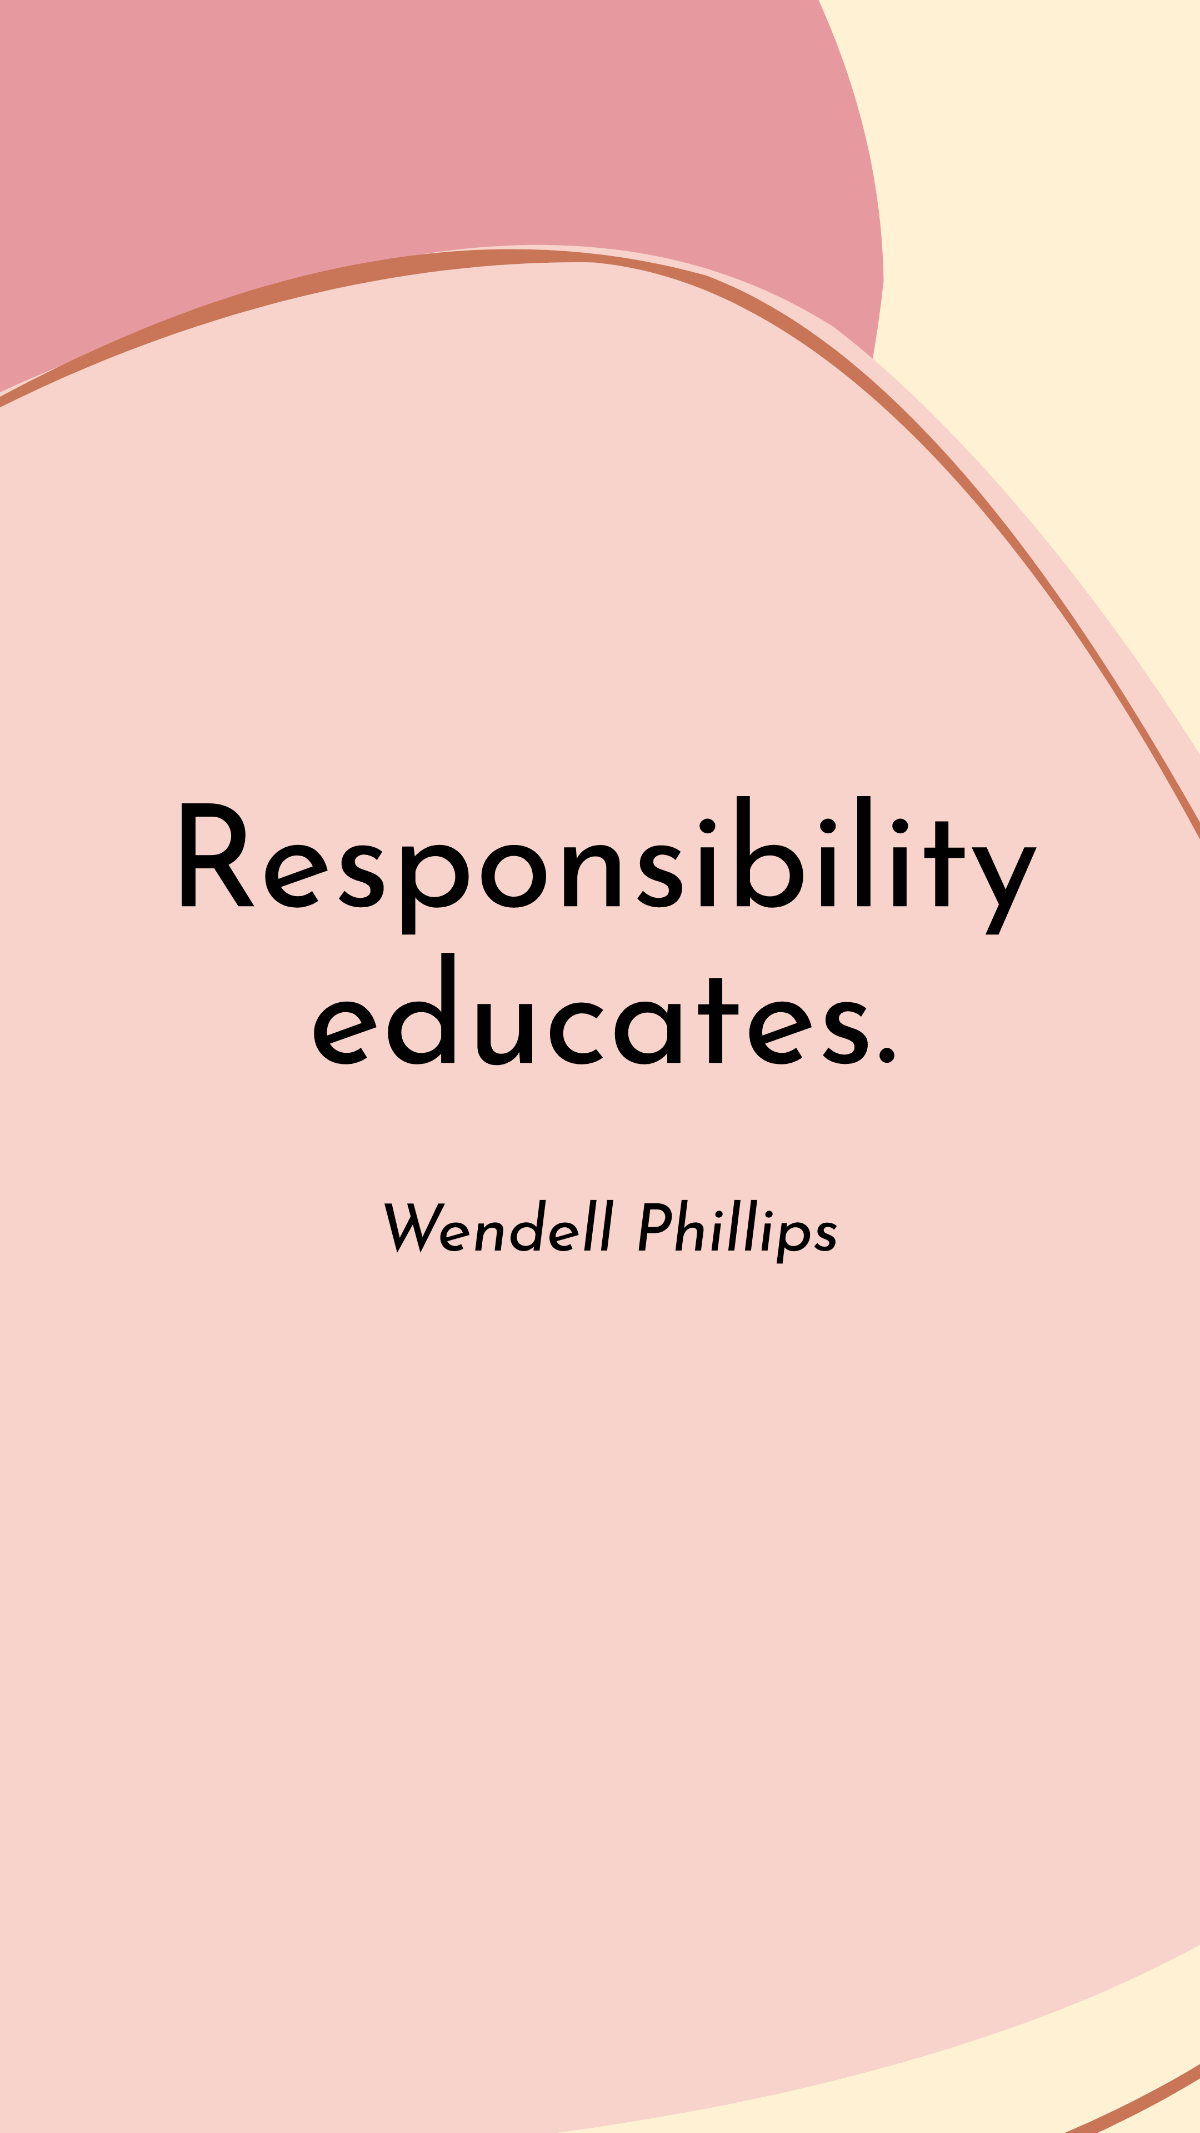 Wendell Phillips - Responsibility educates.